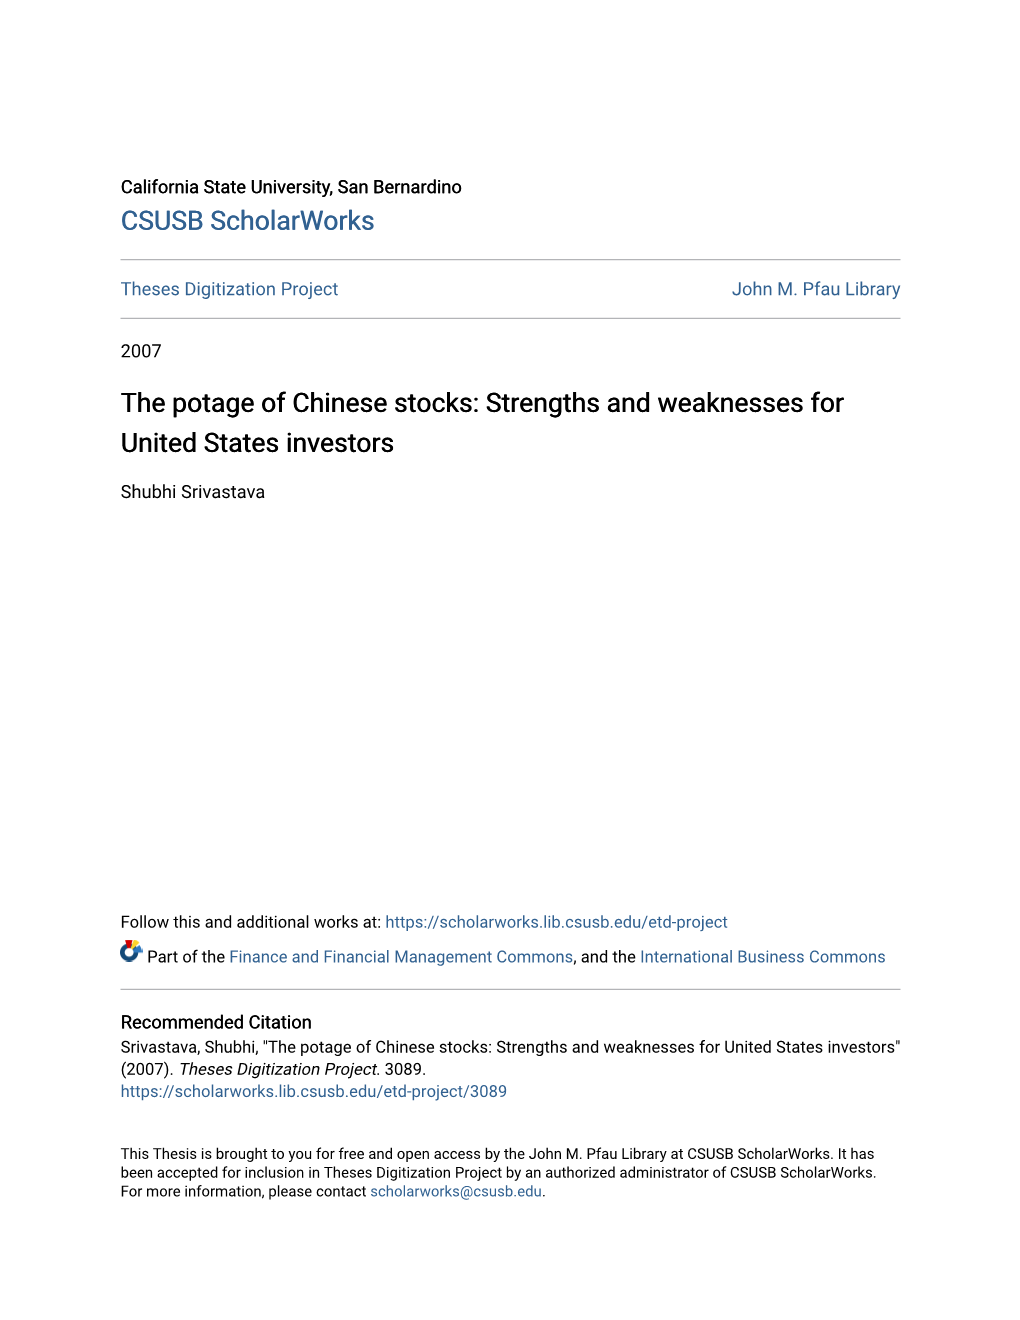 The Potage of Chinese Stocks: Strengths and Weaknesses for United States Investors